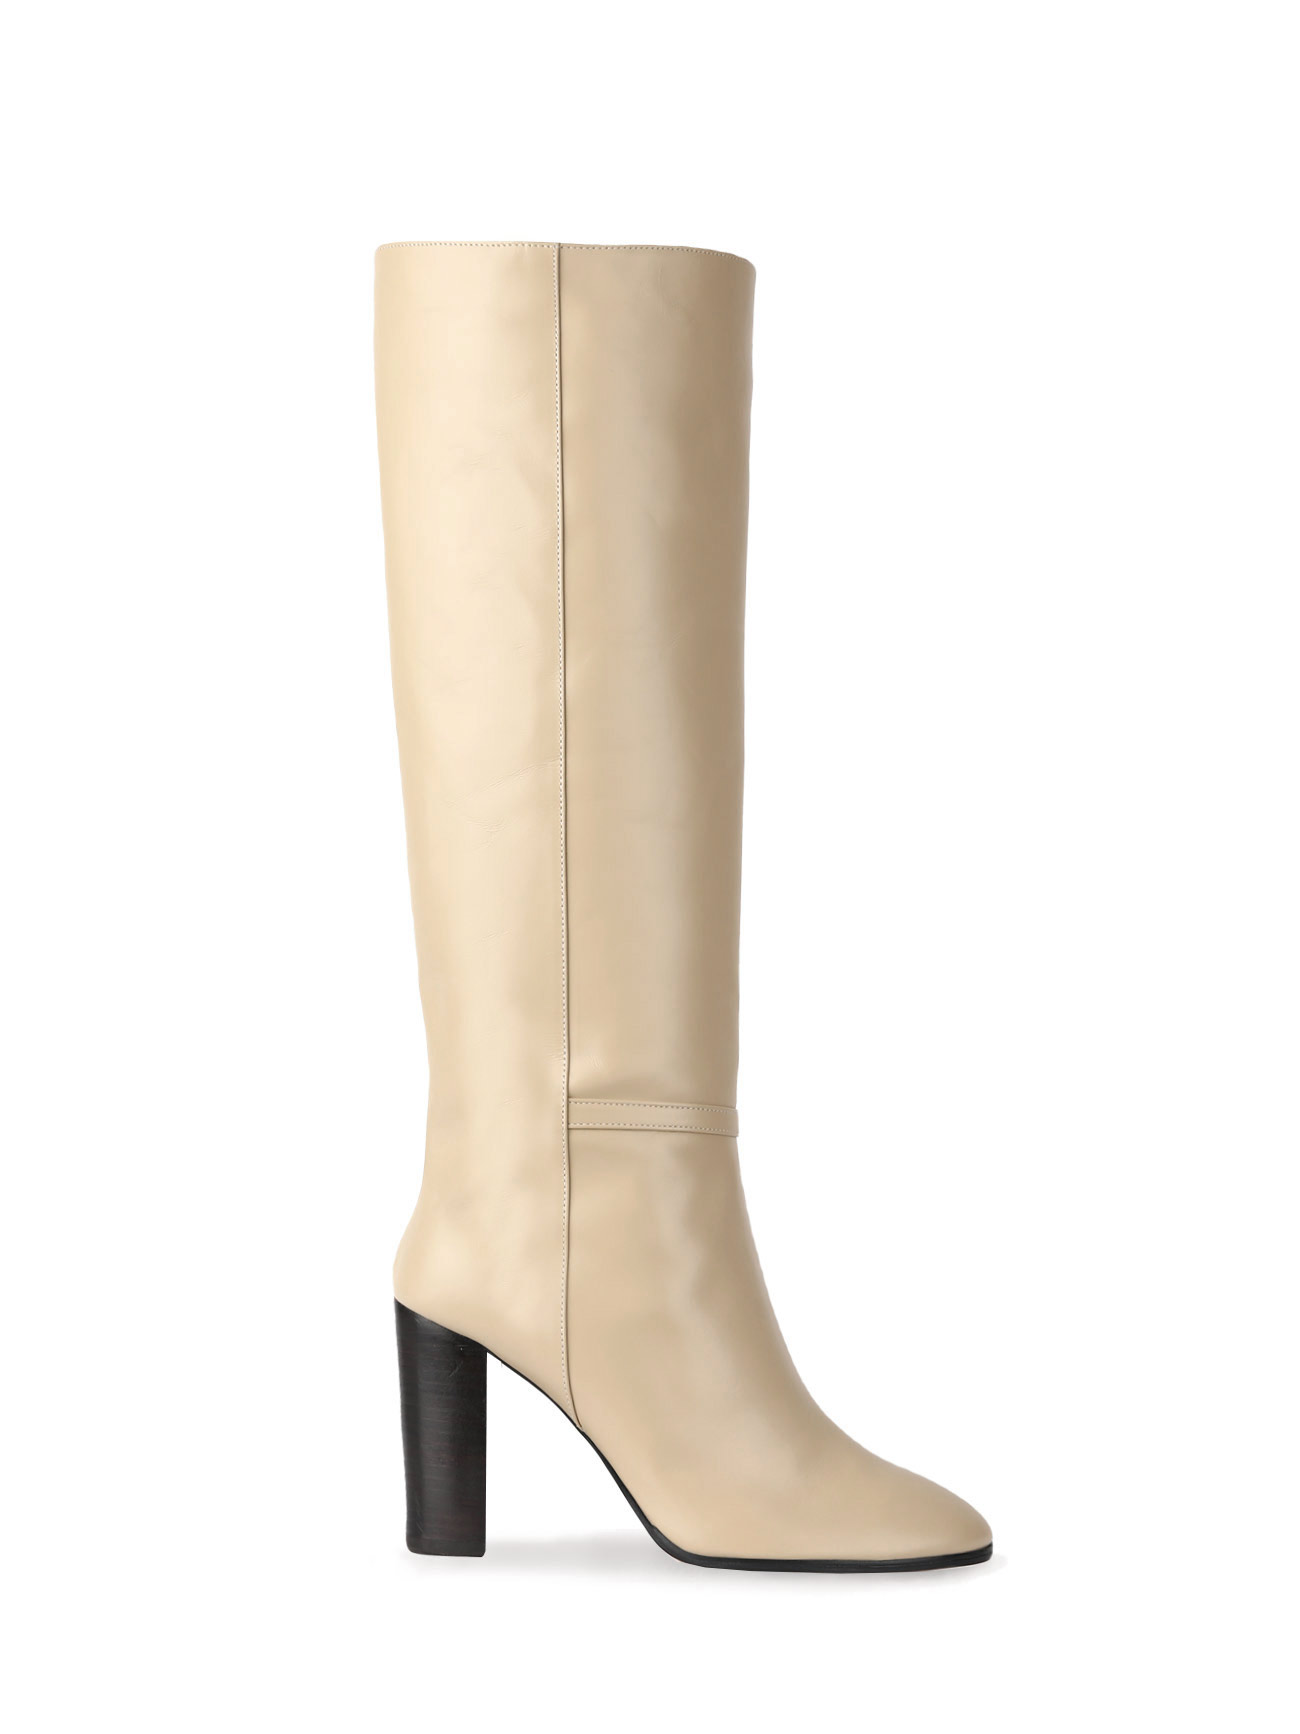 KATE LEATHER KNEE BOOTS - BEIGE